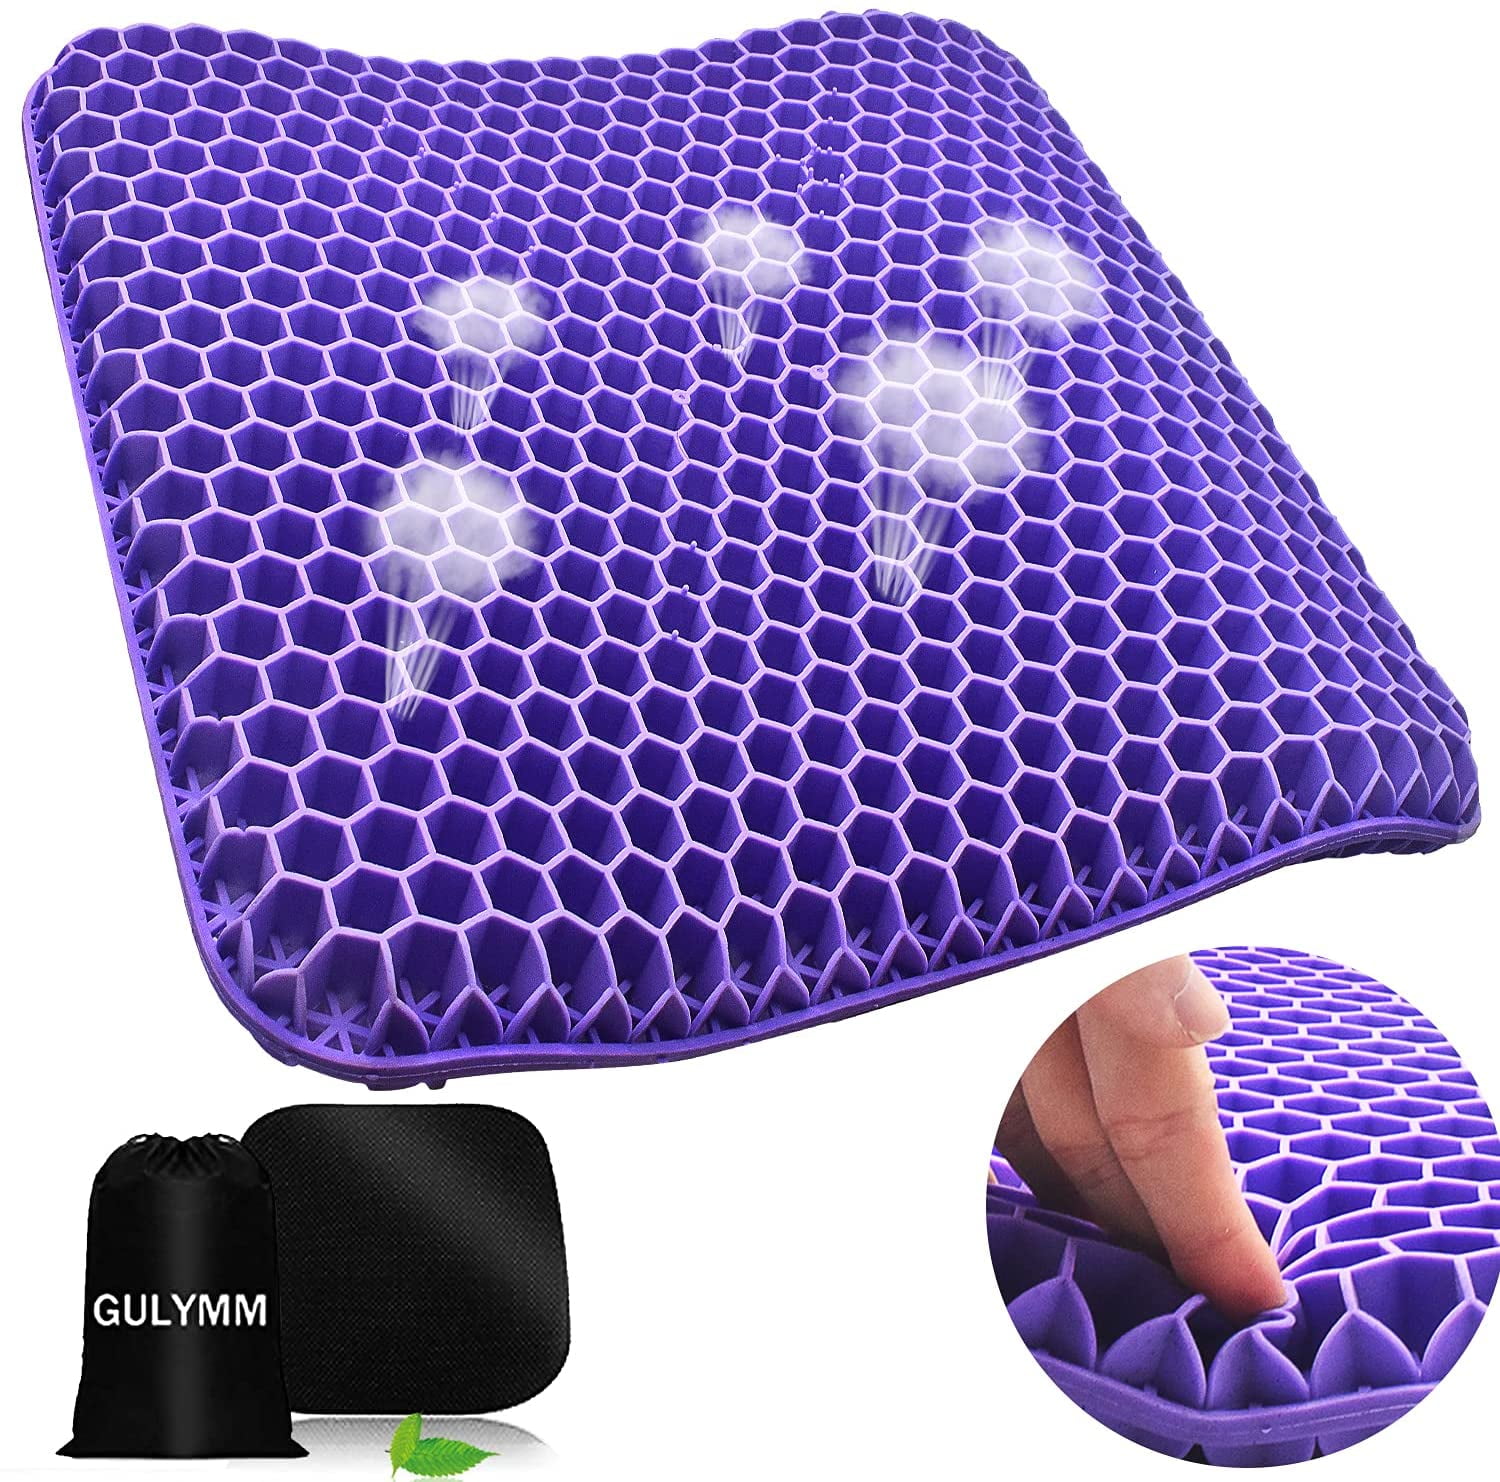 Aiouarc Purple Gel Seat Cushion for Long Sitting, Breathable Honeycomb  Design, Pressure Relief for Back, Sciatica, Tailbone Pain - Office Chair